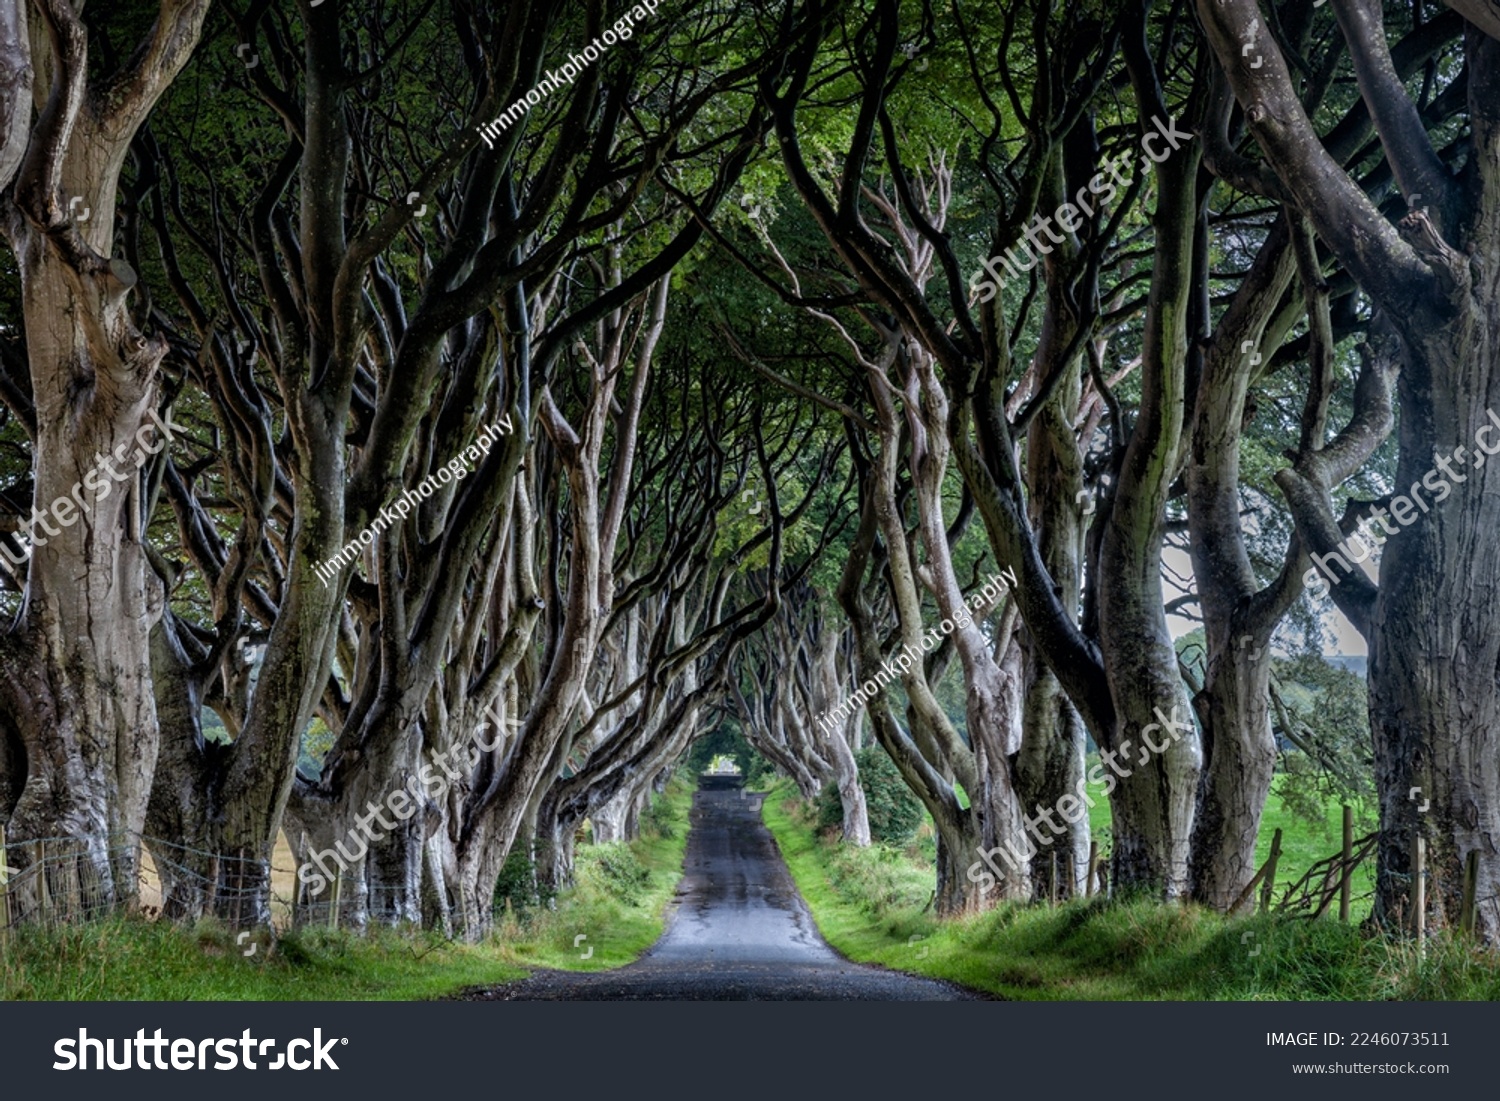 The 18th Century beech tree lined road known as the Dark Hedges in County Antrim, Northern Ireland.  #2246073511